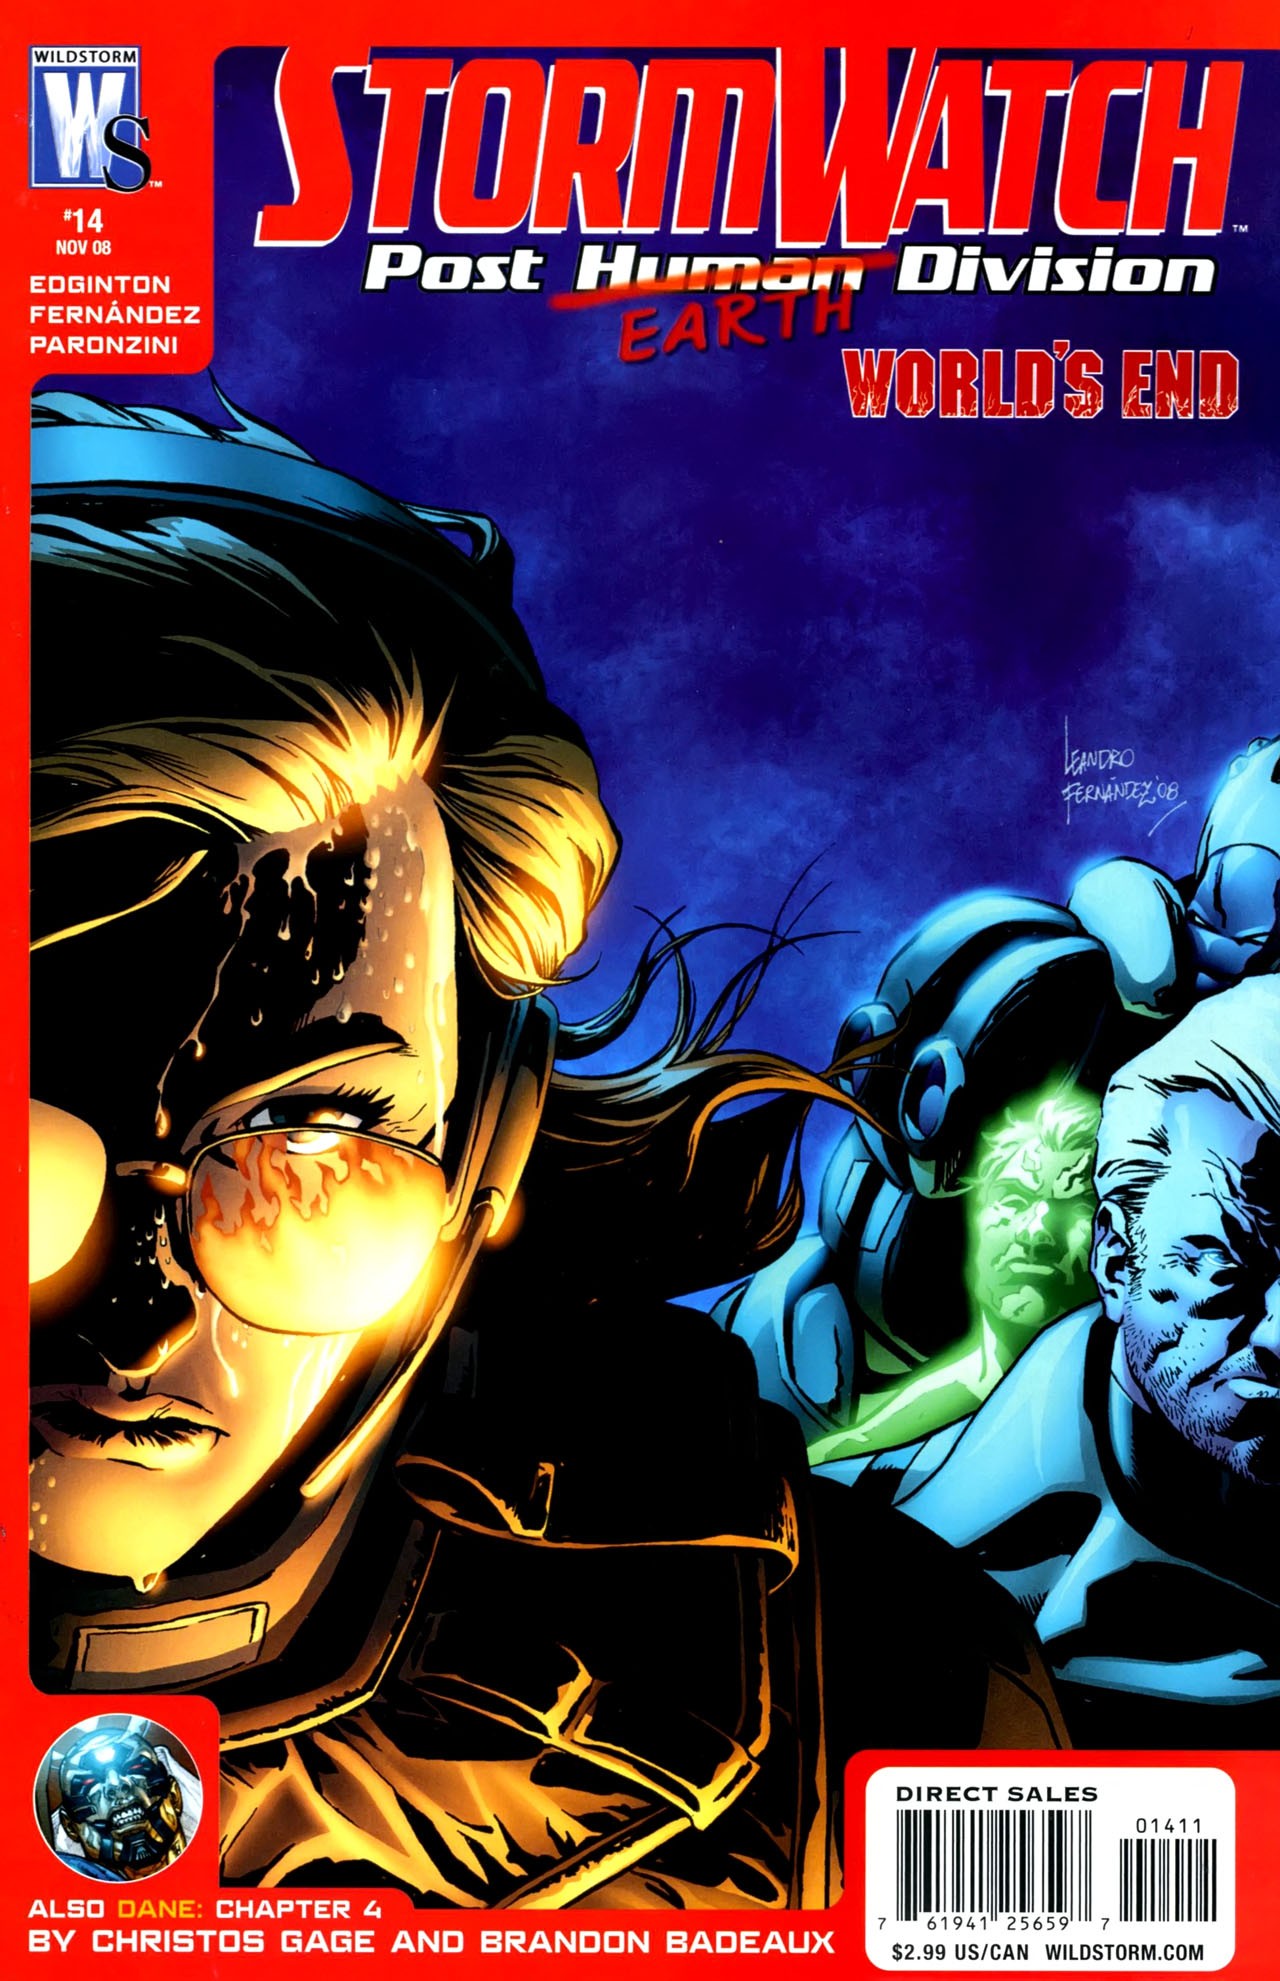 Stormwatch: Post Human Division Vol. 1 #14